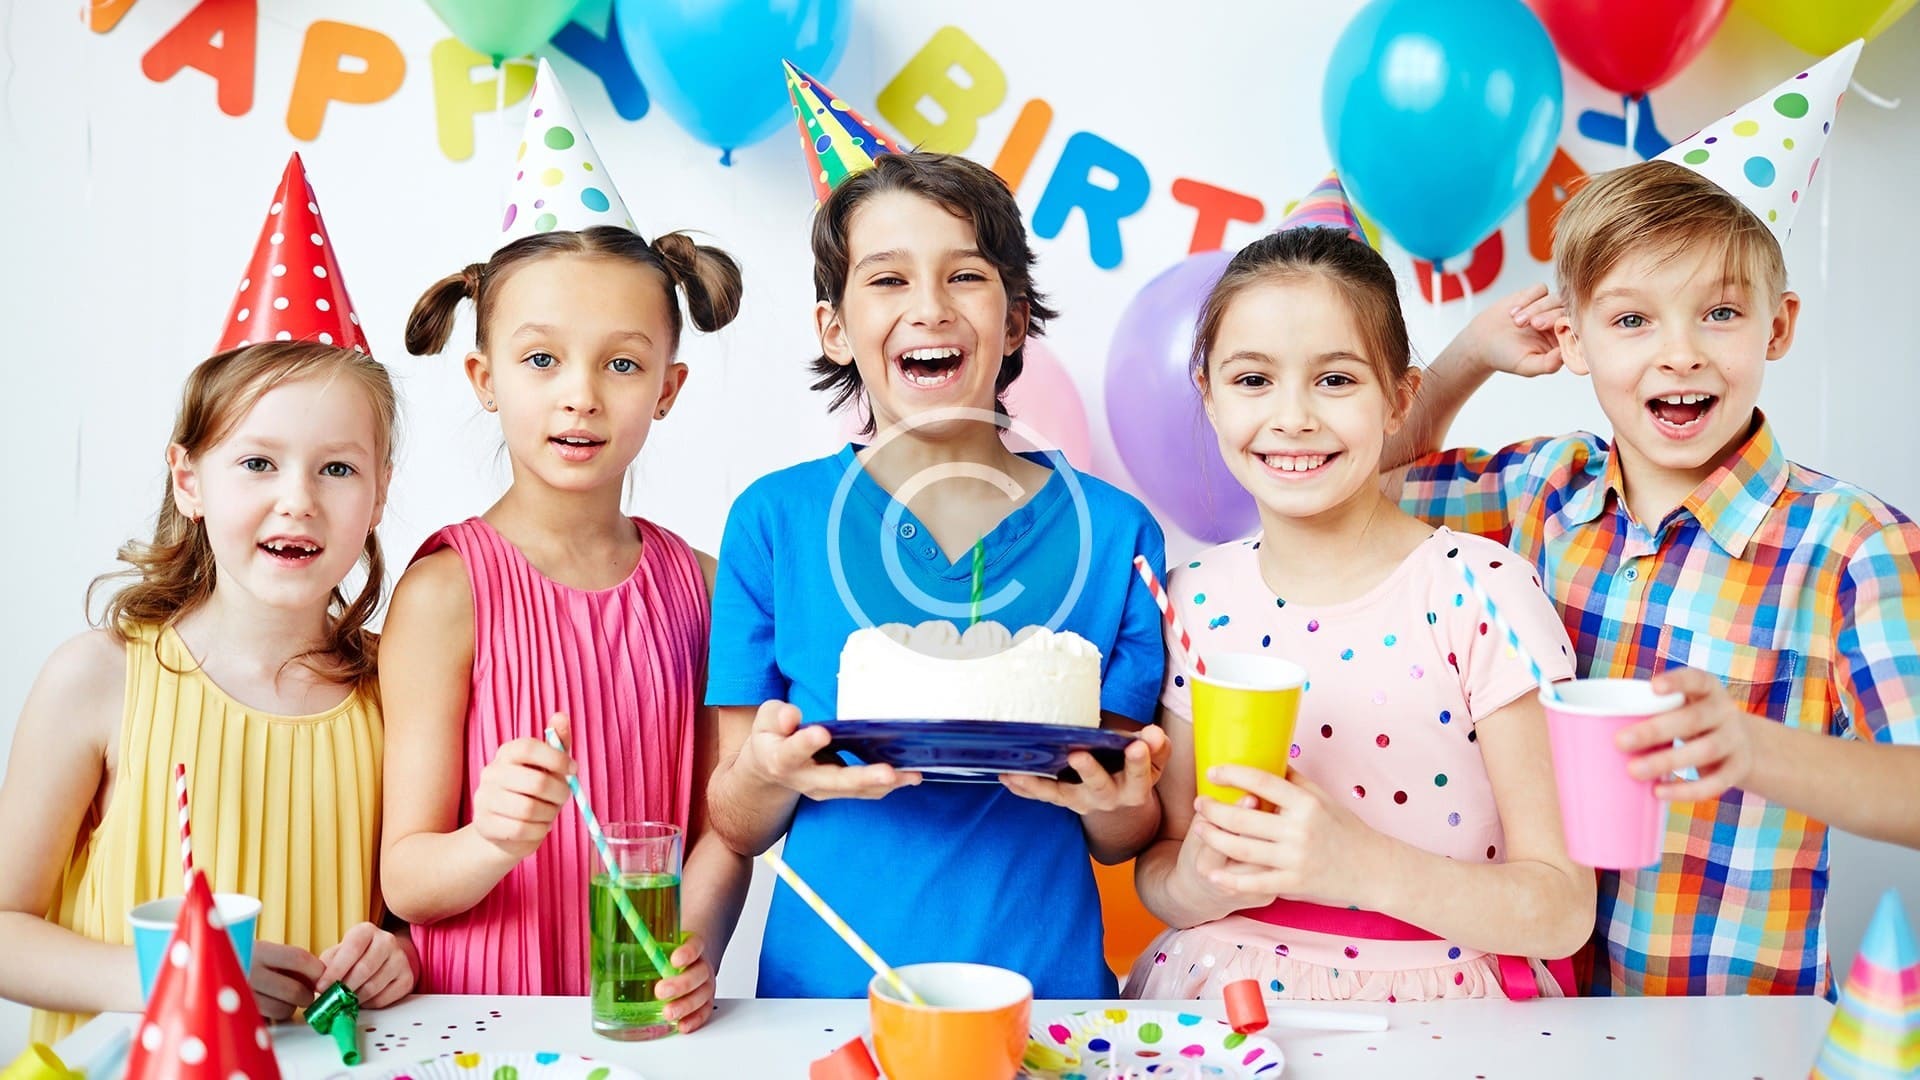 Need a Theme for a Birthday Party? 